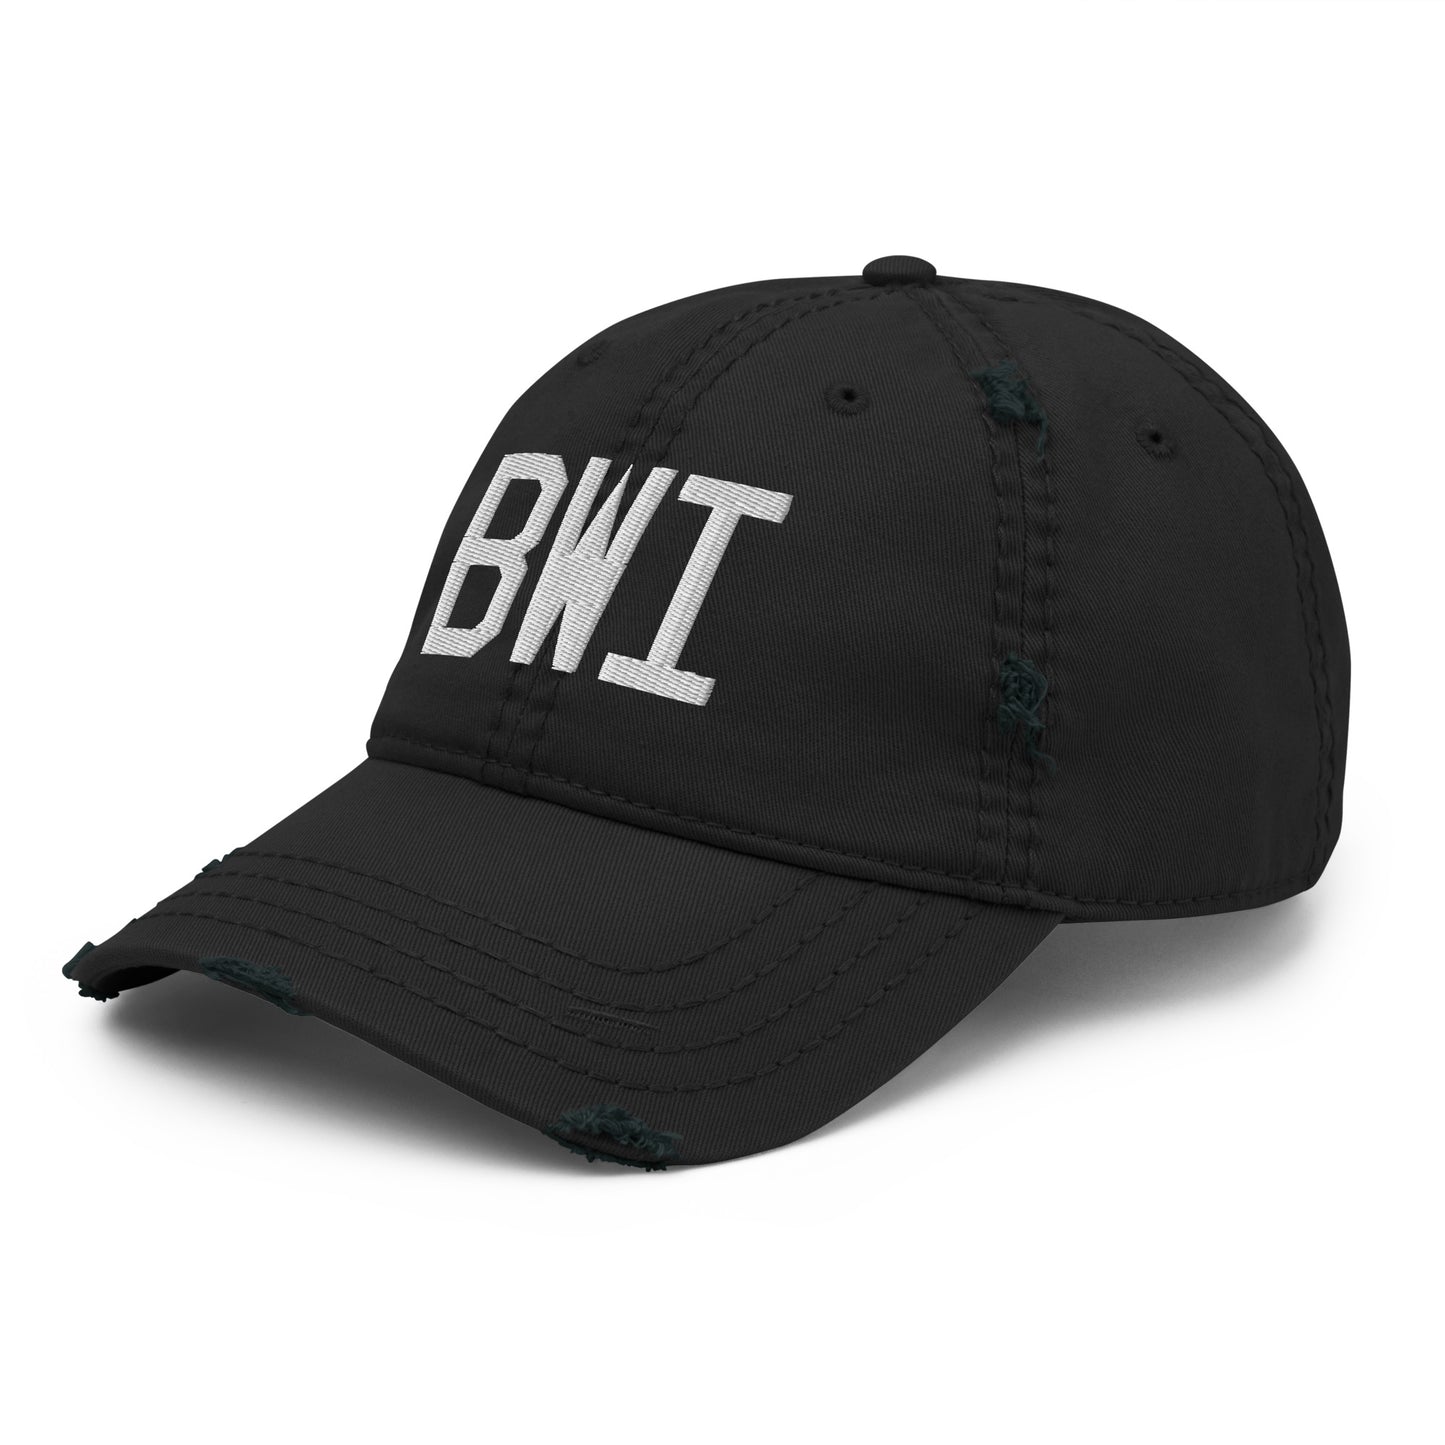 Airport Code Distressed Hat - White • BWI Baltimore • YHM Designs - Image 11